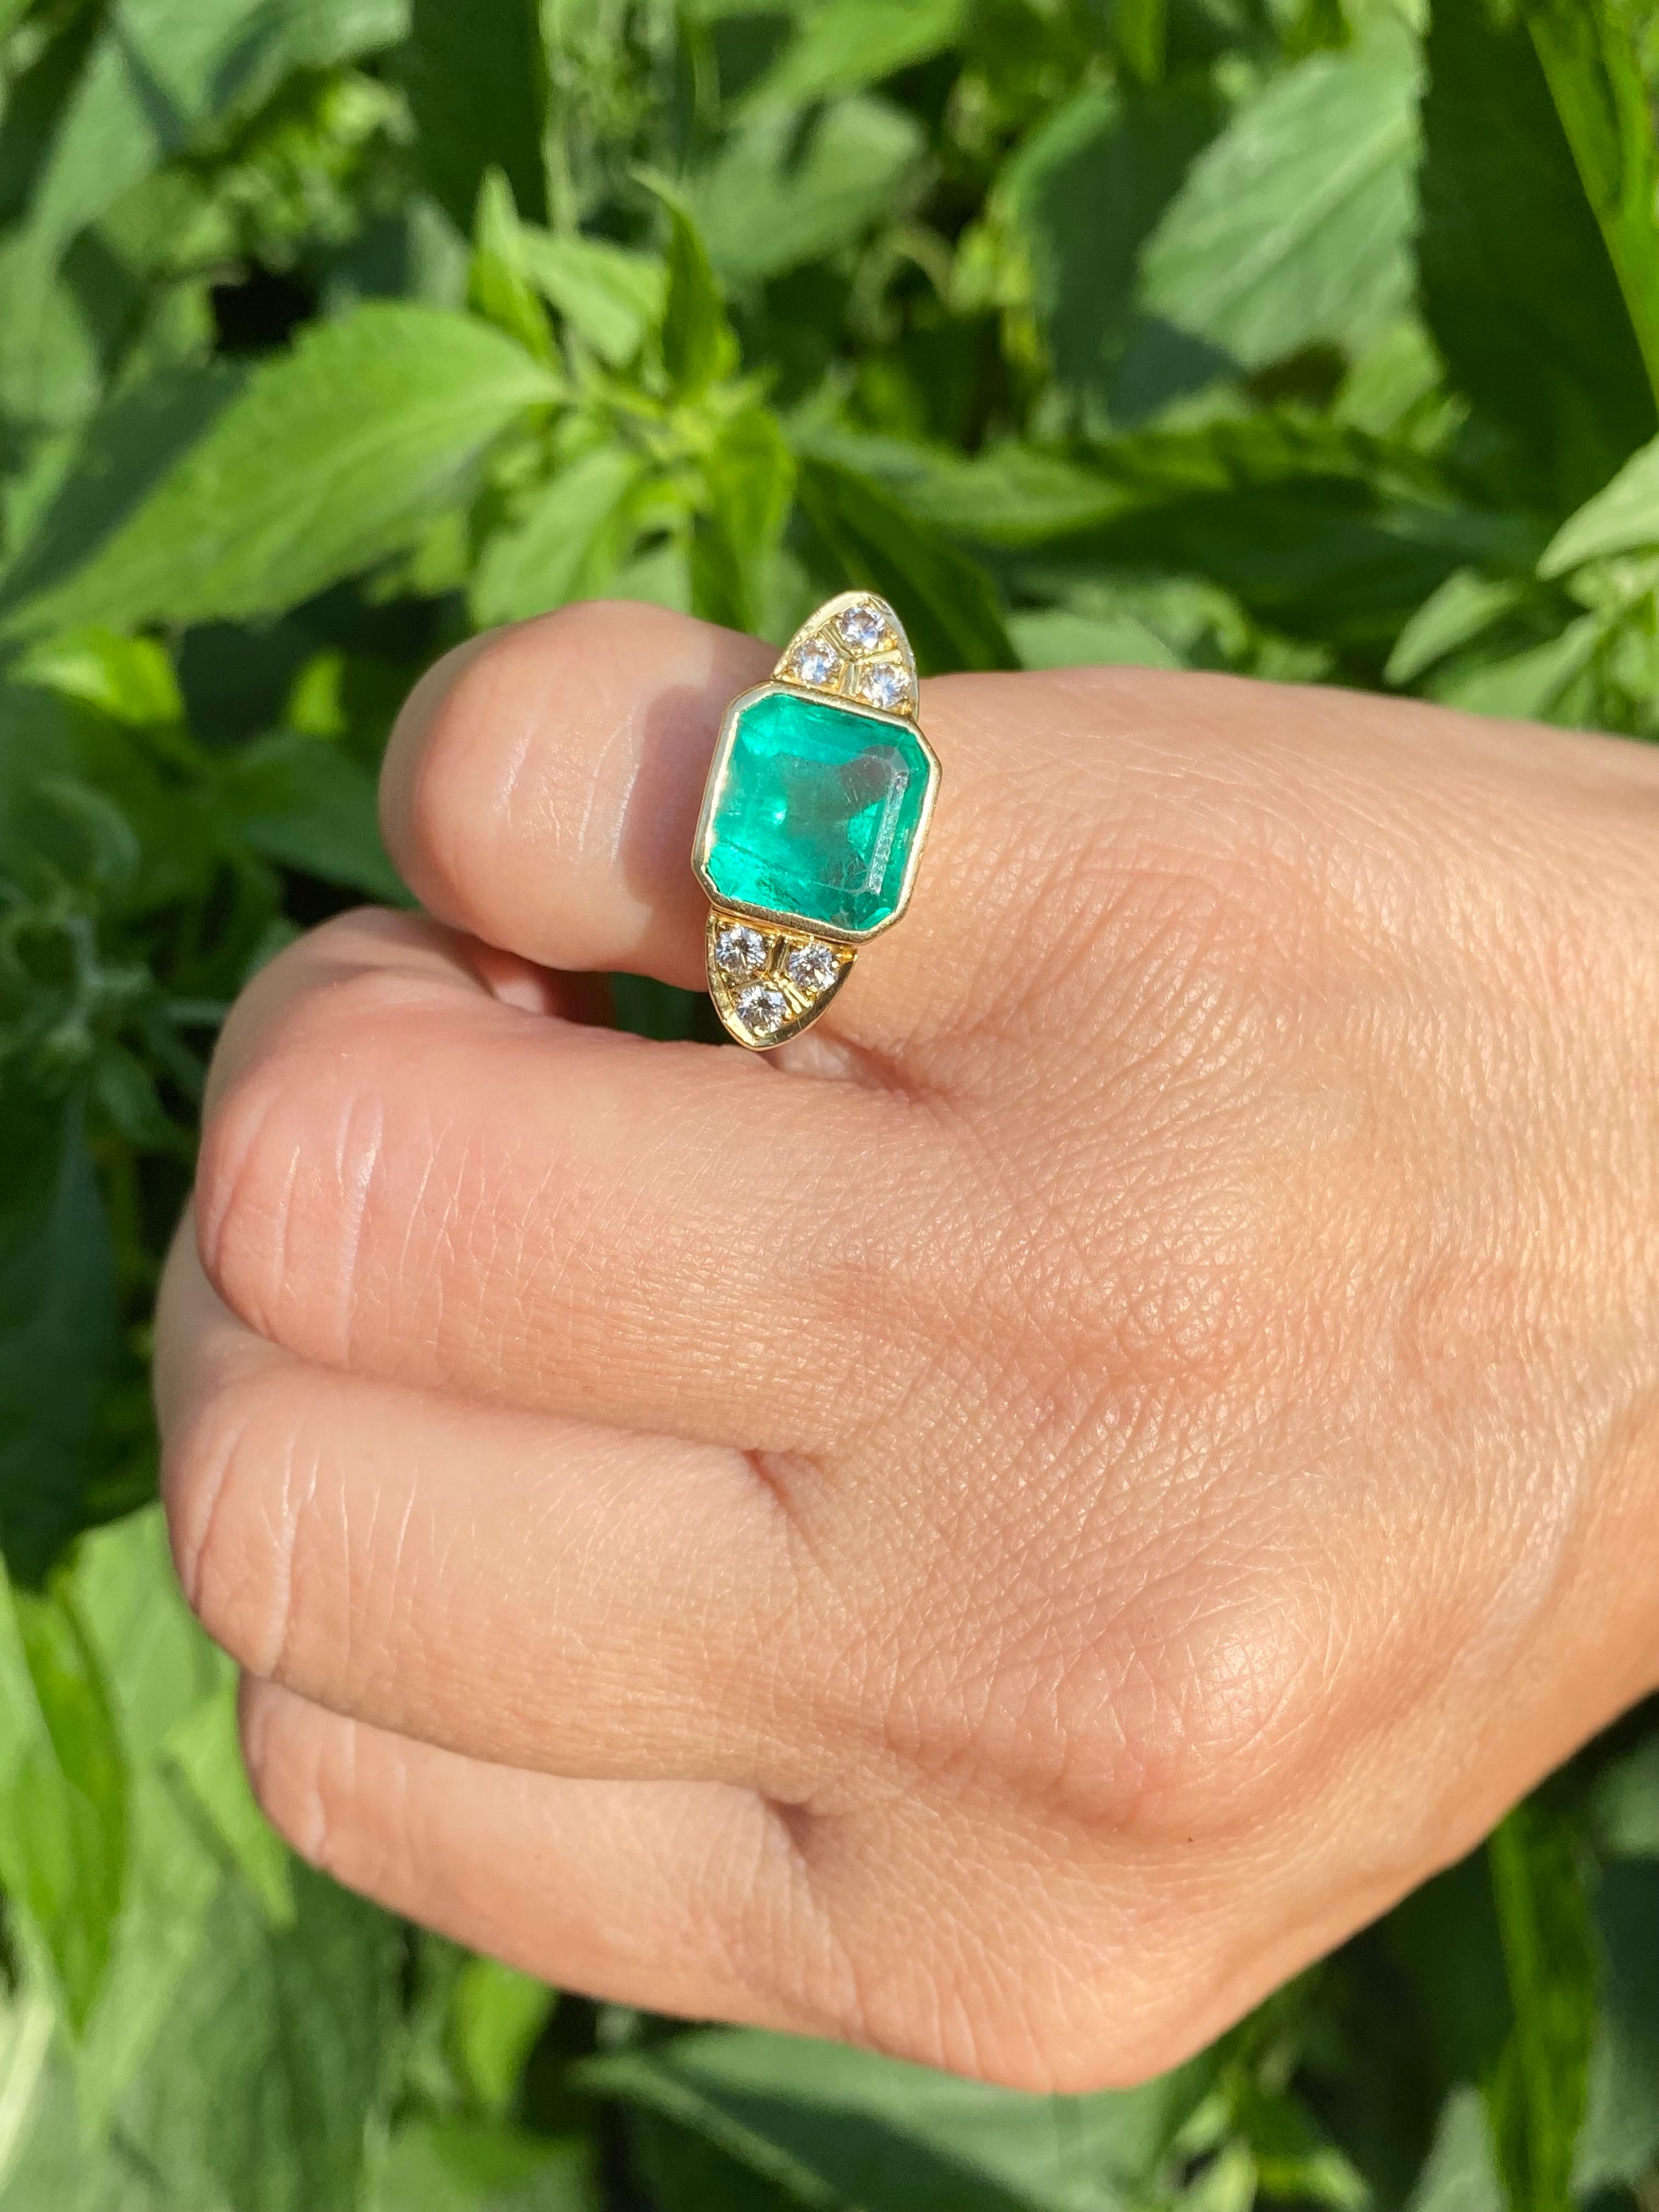 Unisex Colombian Emerald ring with 6 natural diamond side stones. This ring has structural and aesthetic versatility for both everyday wear and special occasions. The Emerald is mounted in a bezel setting, thereby significantly decreasing the